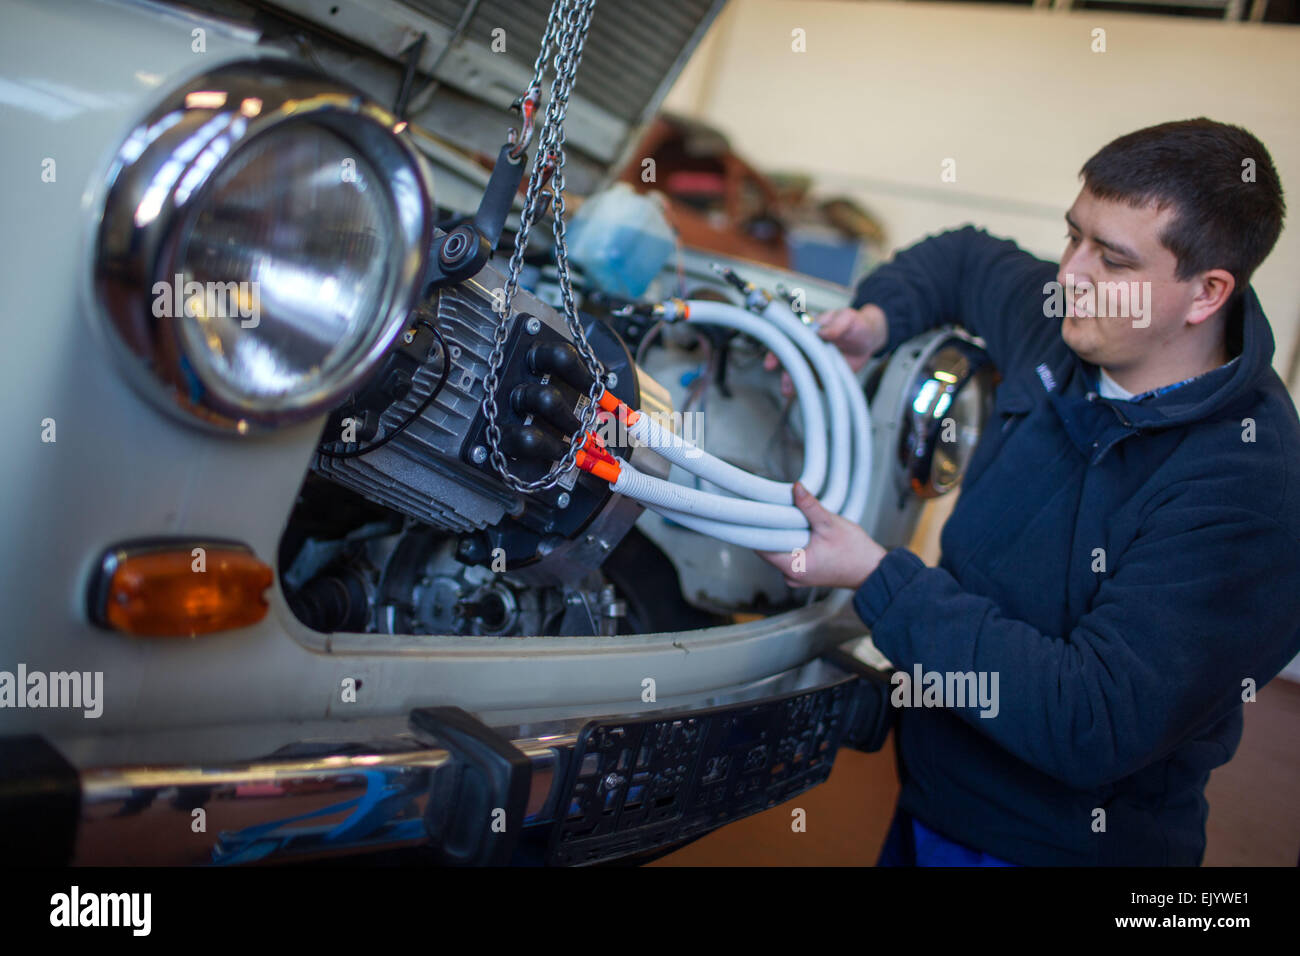 Schwerin, Germany. 12th Mar, 2015. Mechanic Martin Koechele and a Trabant (Trabi) car, which is being converted to run on electricity at a workshop in Schwerin, Germany, 12 March 2015. The E-Trabi is intended to be used for tourist safaris on the island of Ruegen in spring 2015. The firm ReeVolt converts existing vehicles to run on electricity. Photo: Jens Buettner/dpa/Alamy Live News Stock Photo